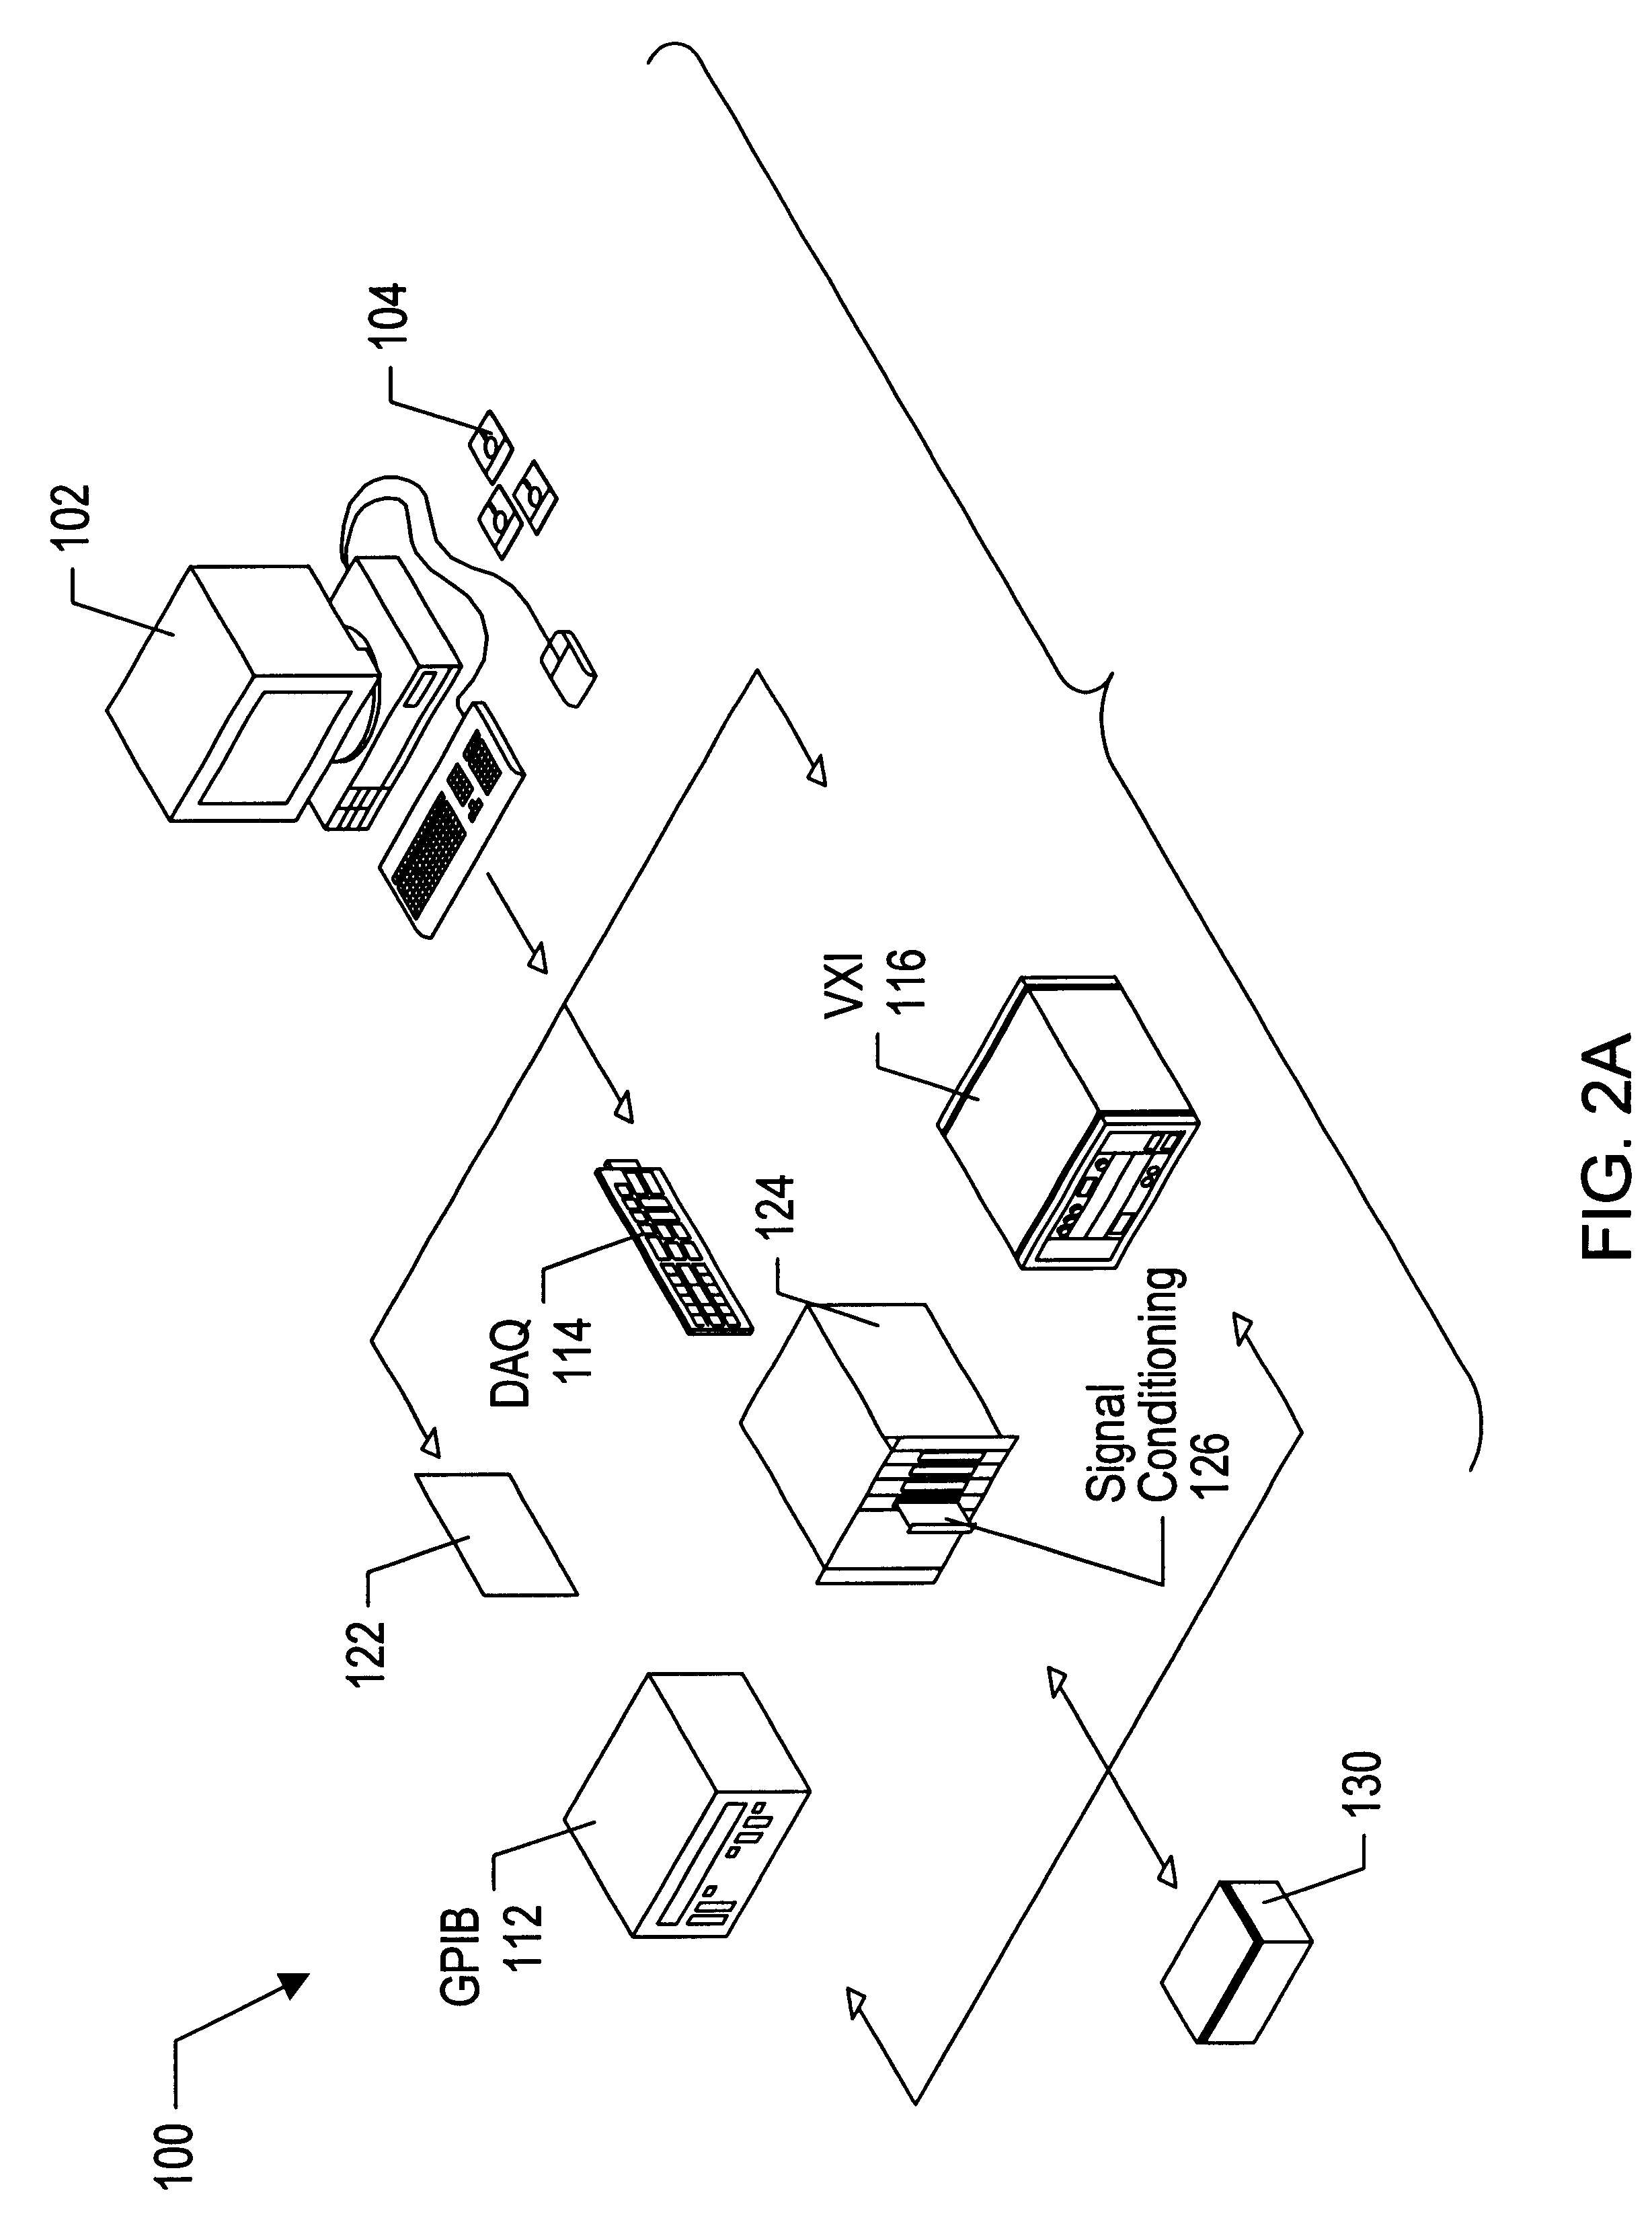 Instrumentation system and method which performs instrument interchangeability checking